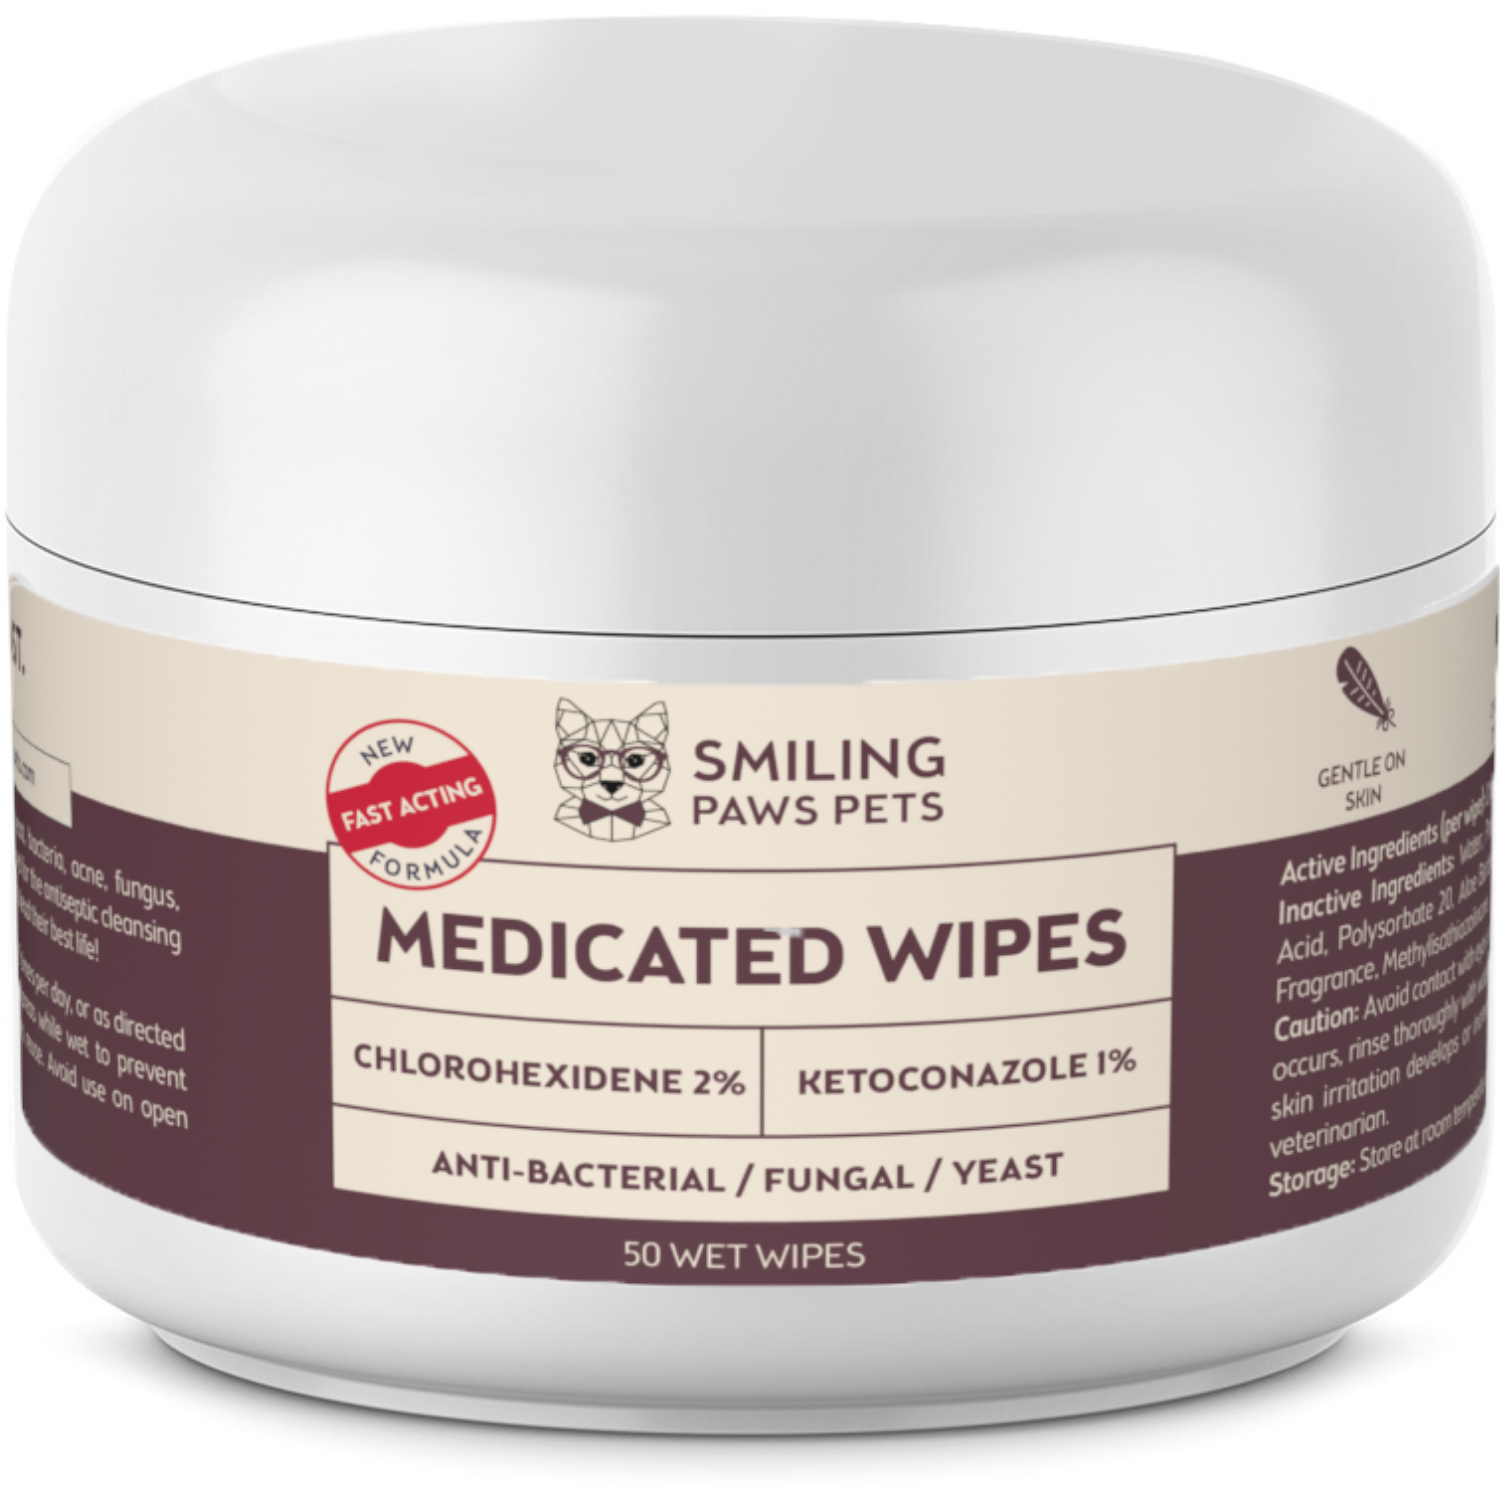 Medicated Wipes For Dogs & Cats - Antiseptic, Antibacteria & Antifungal - Contains Chlorhexidine & Ketoconazole